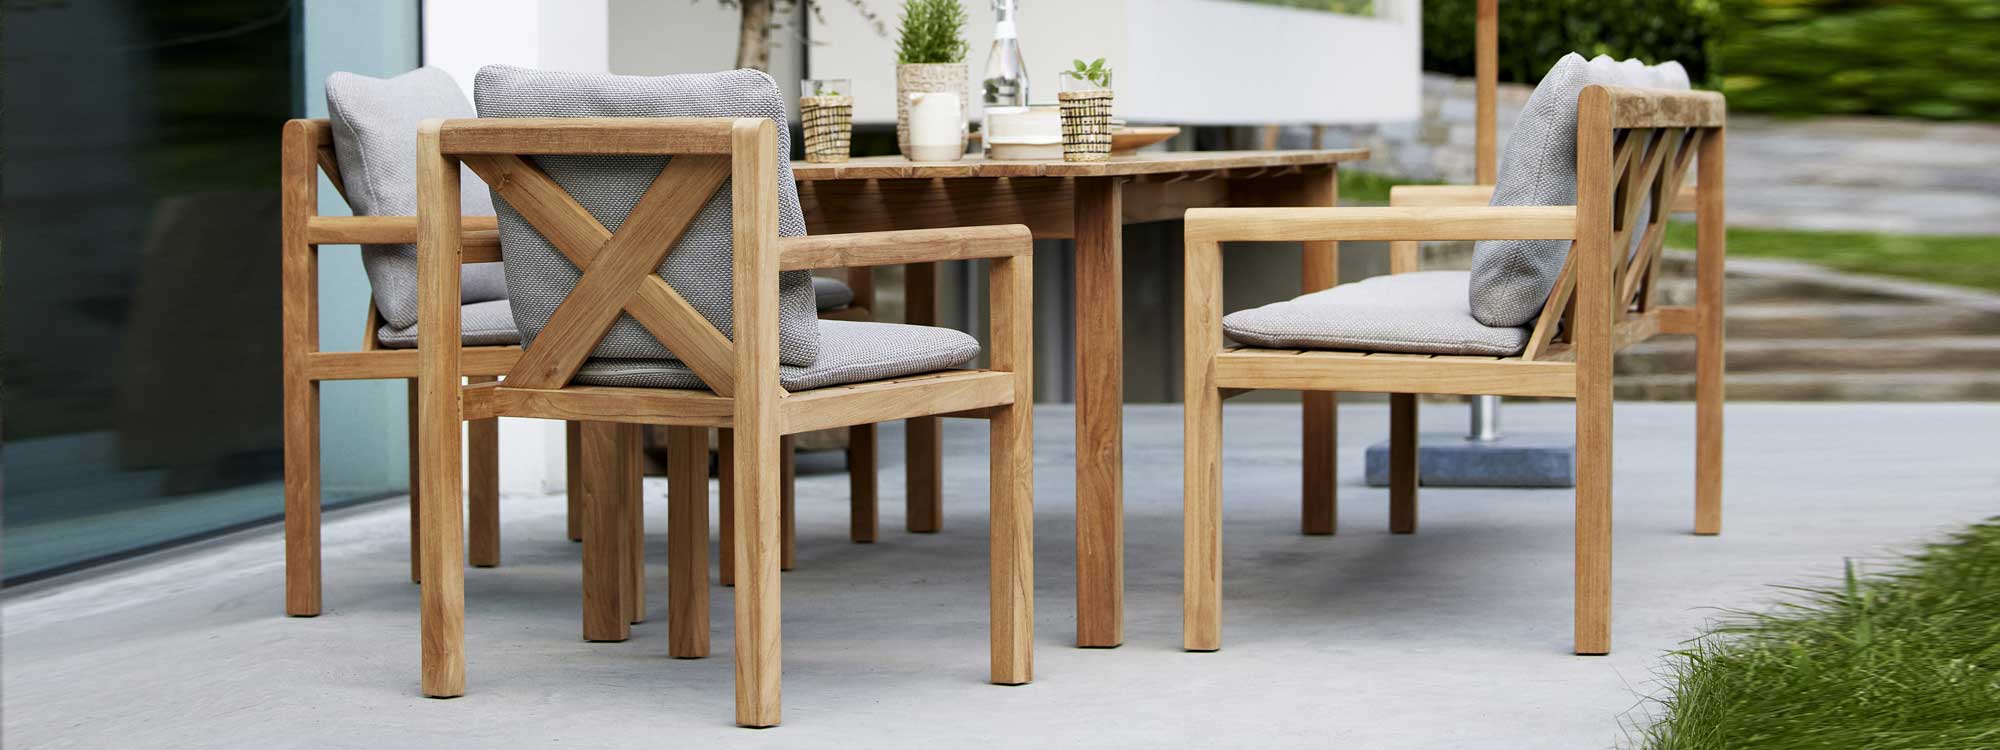 Image of Grace teak table, benches and chairs by Cane-line, showing the furniture with light grey cushions